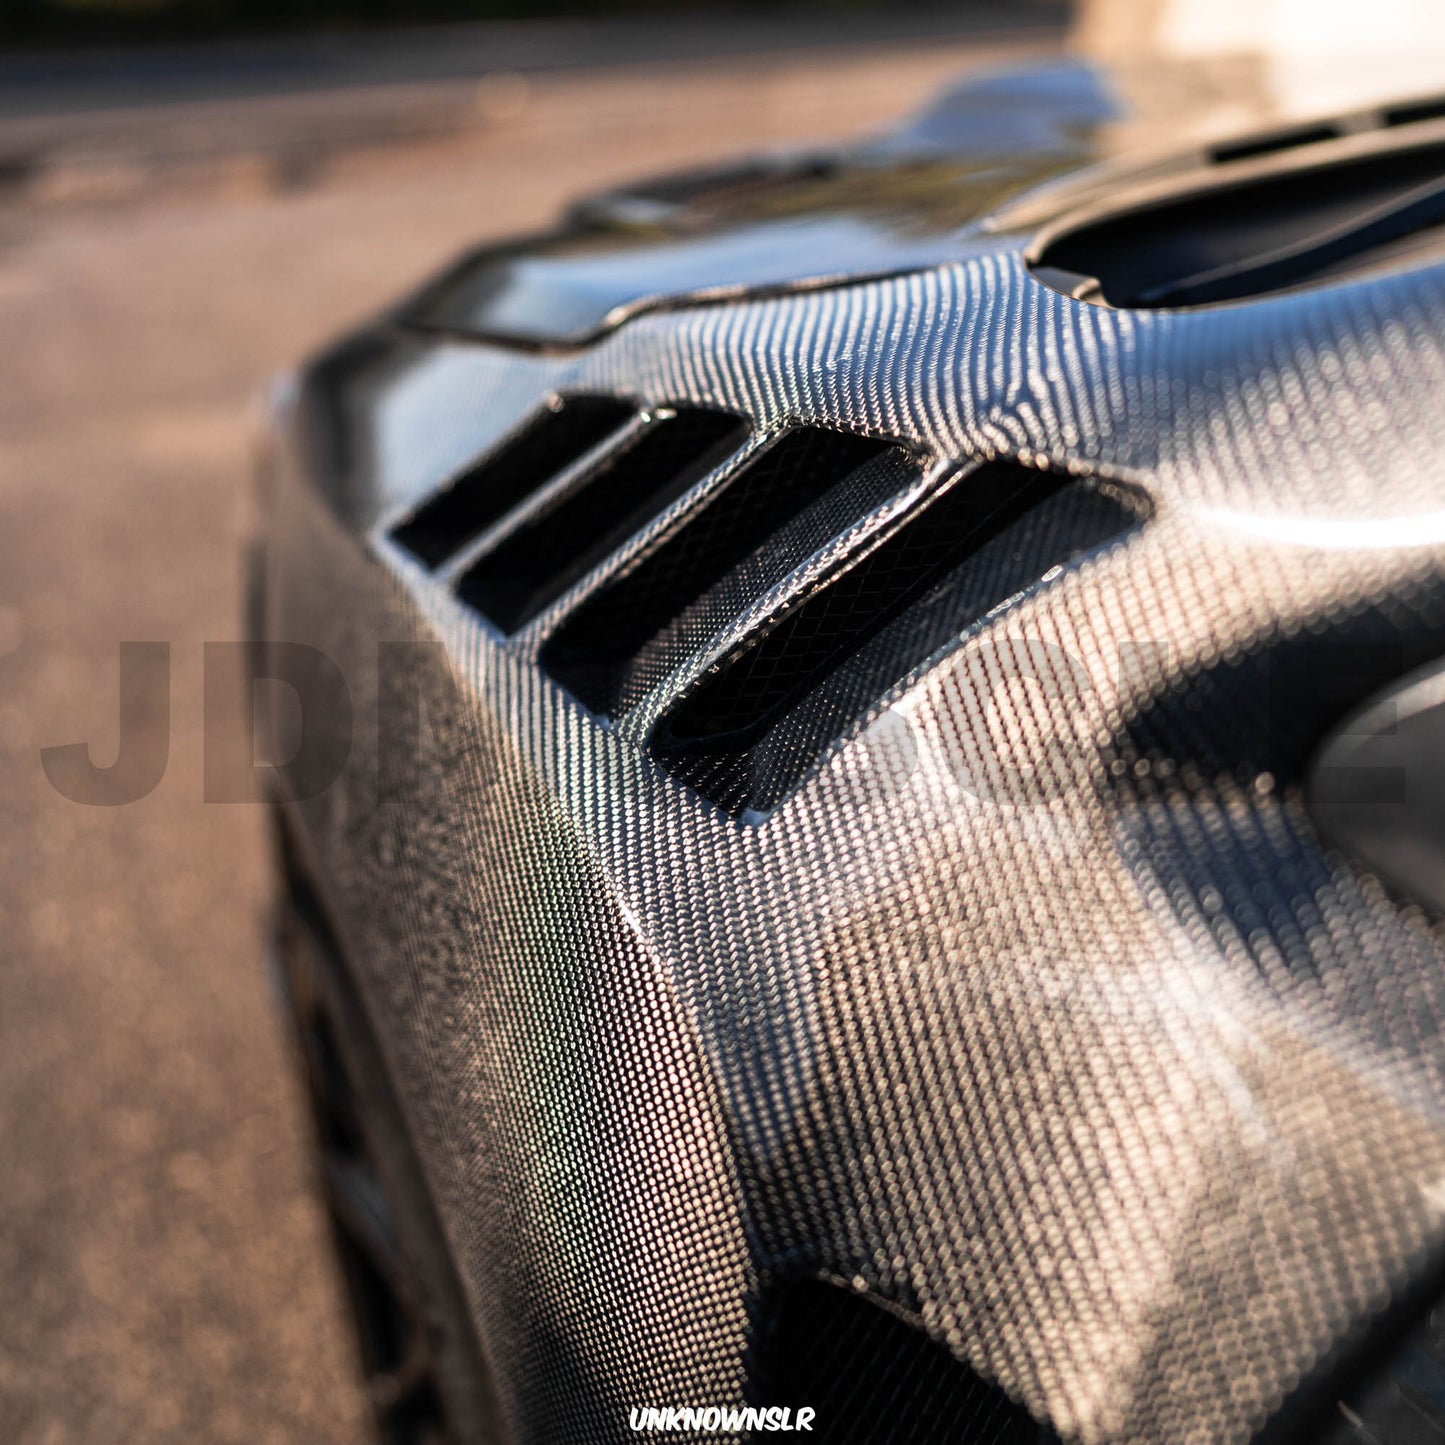 JDMuscle Tanso Carbon Fiber/FRP Vented Fenders for 2015+WRX/STI-Fenders-JDMuscle-JDMuscle